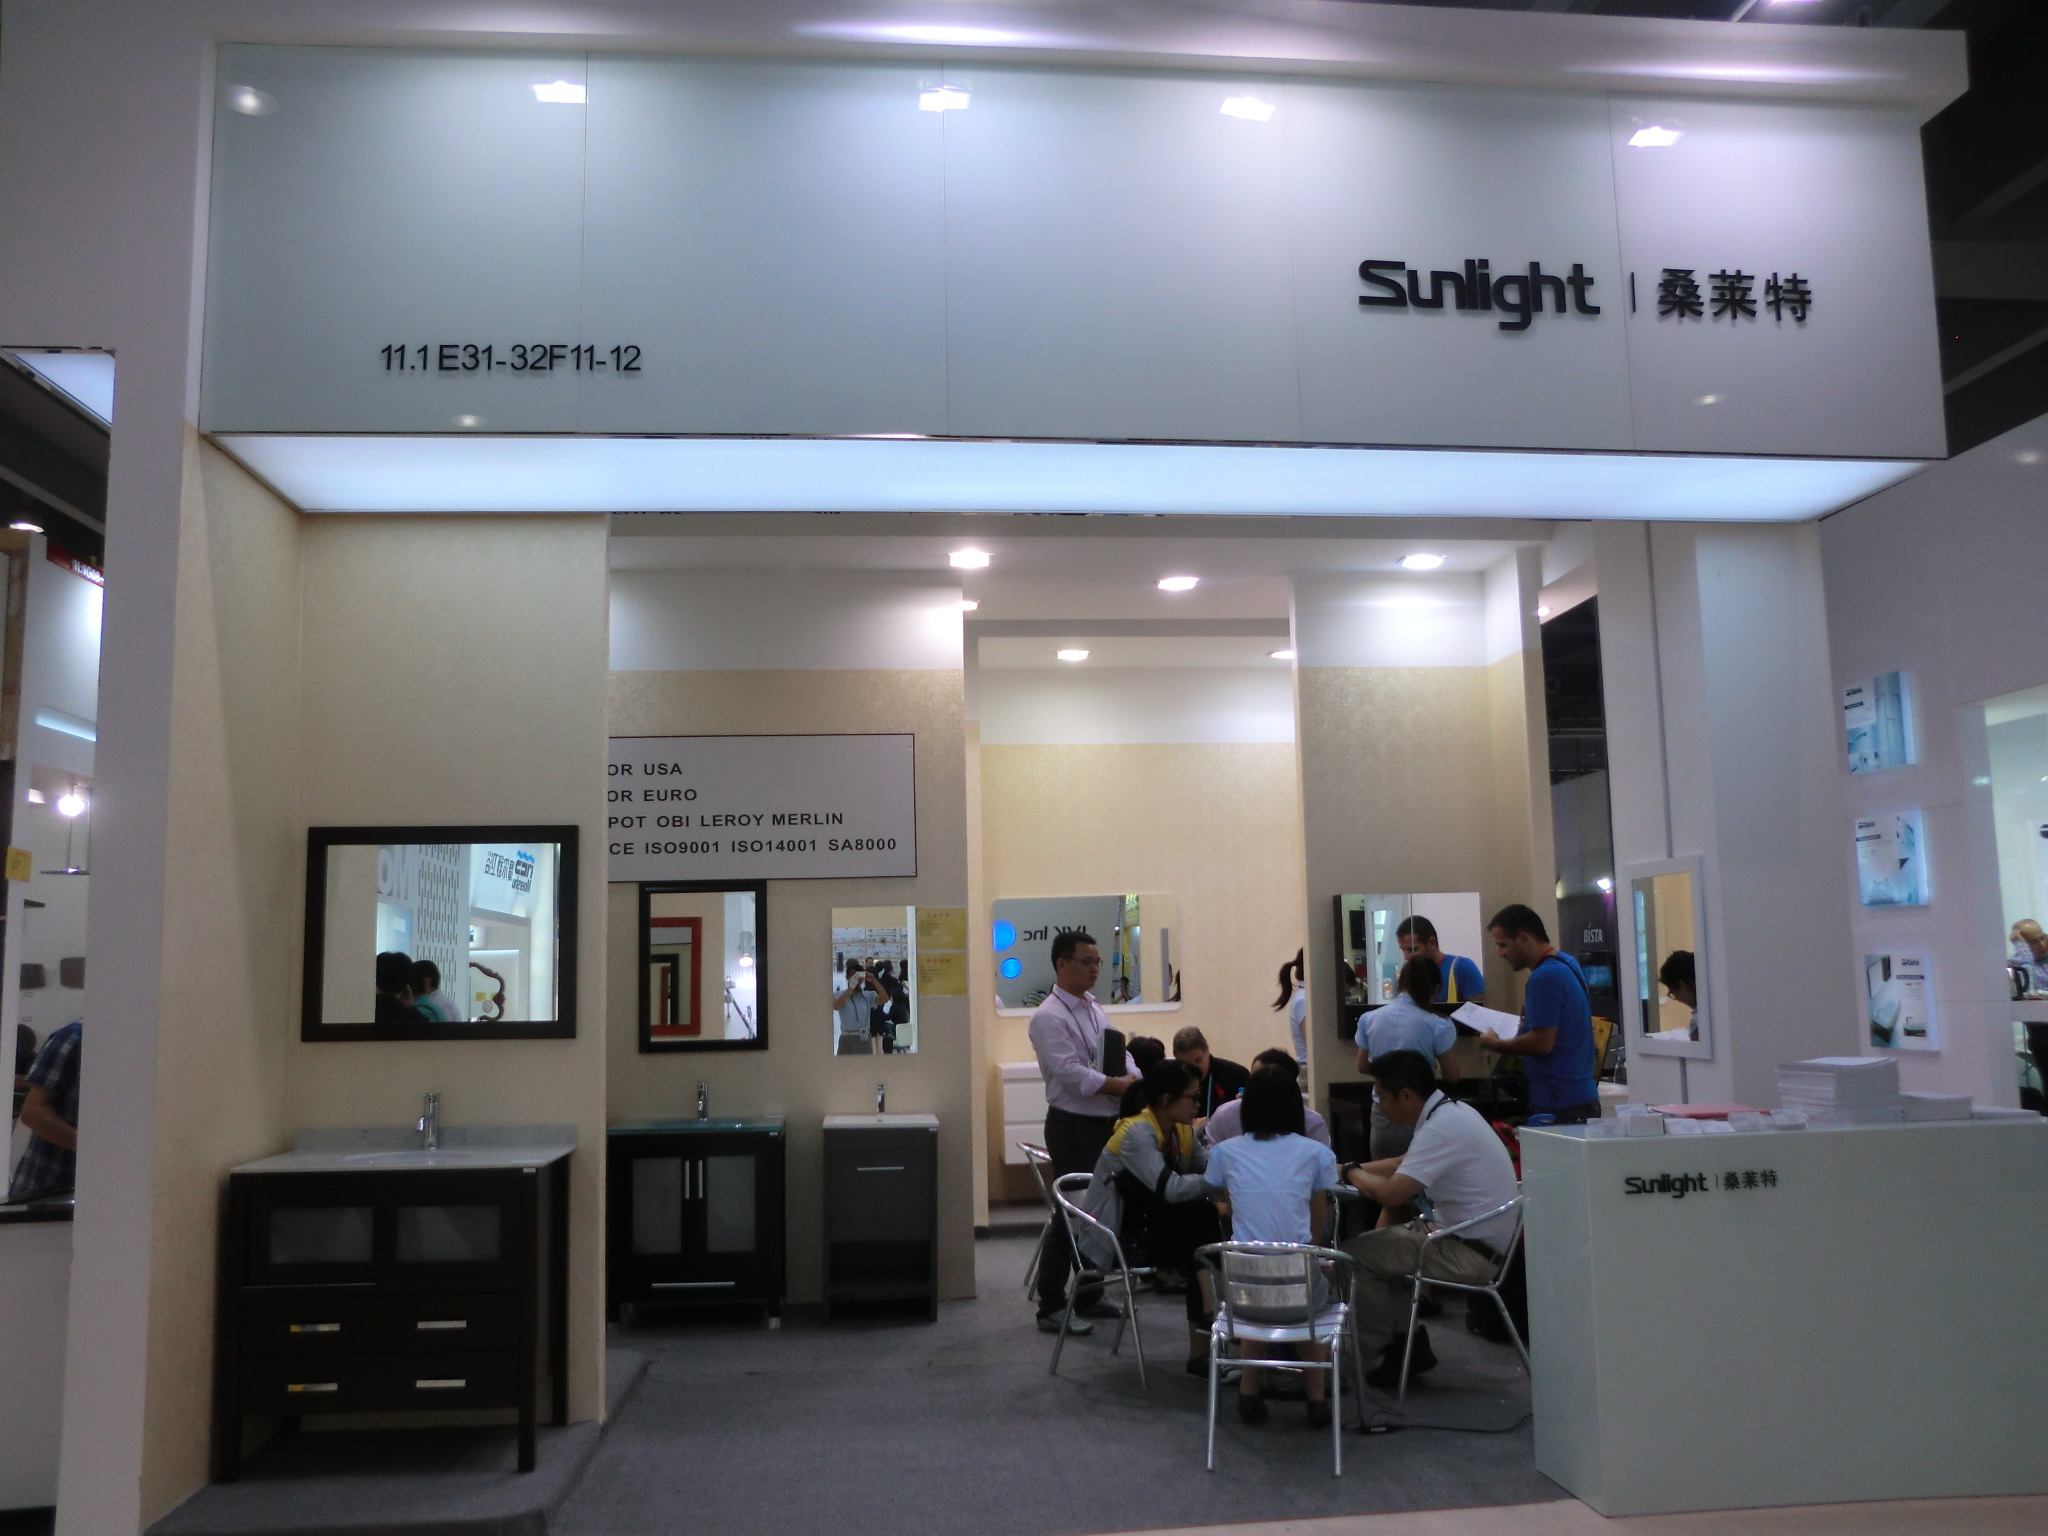 view of Sunlight's booth